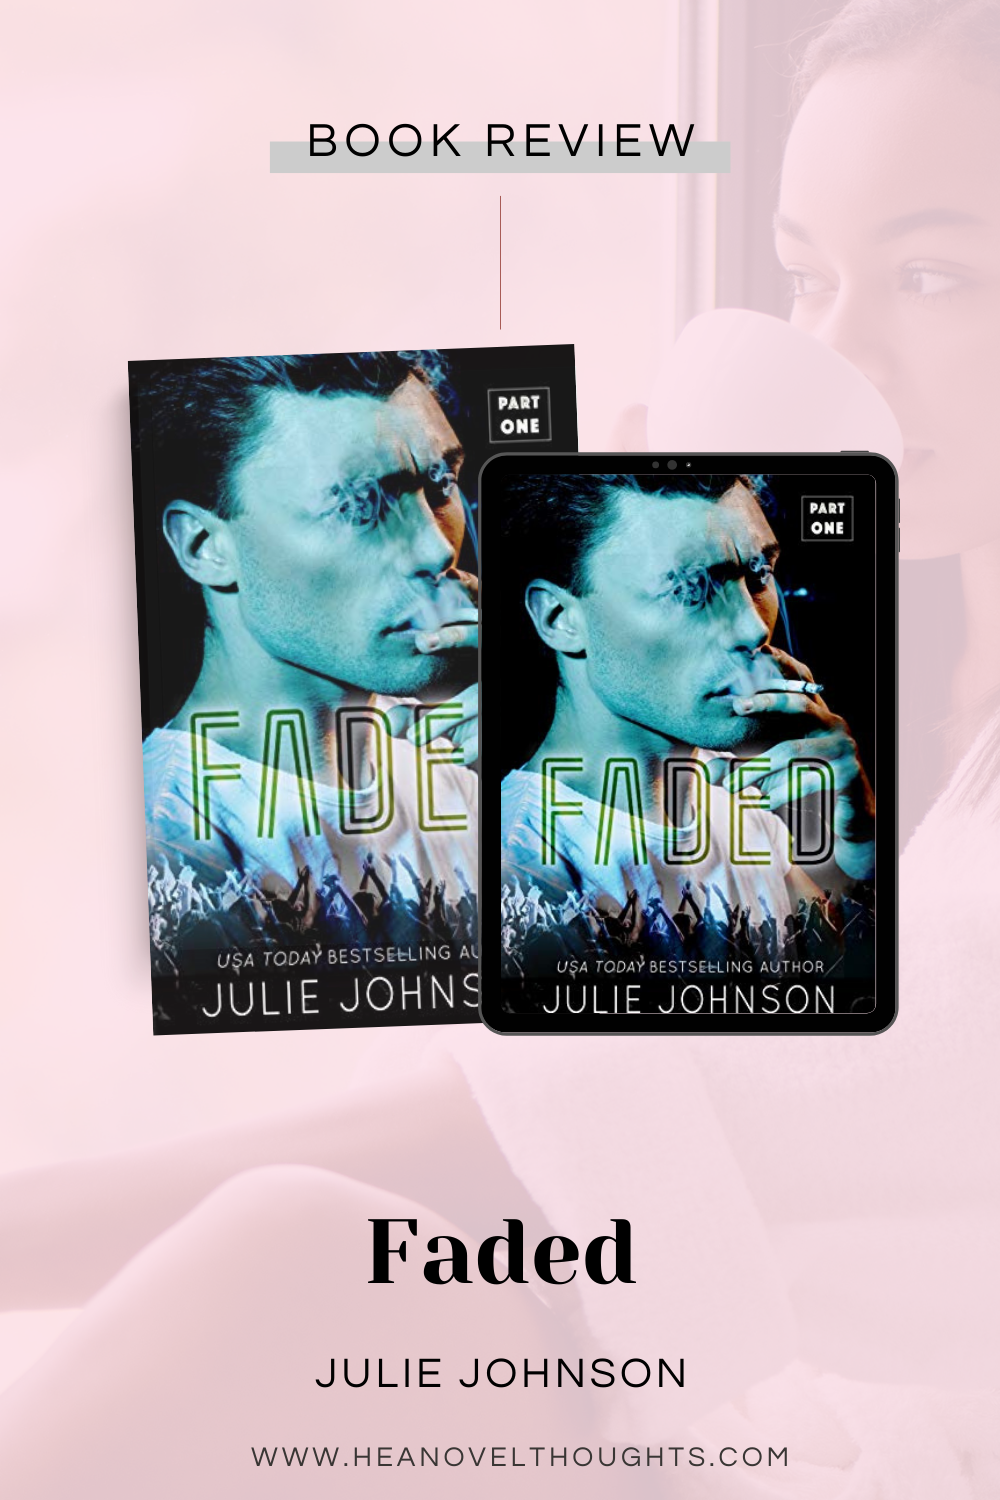 Faded by Julie Johnson